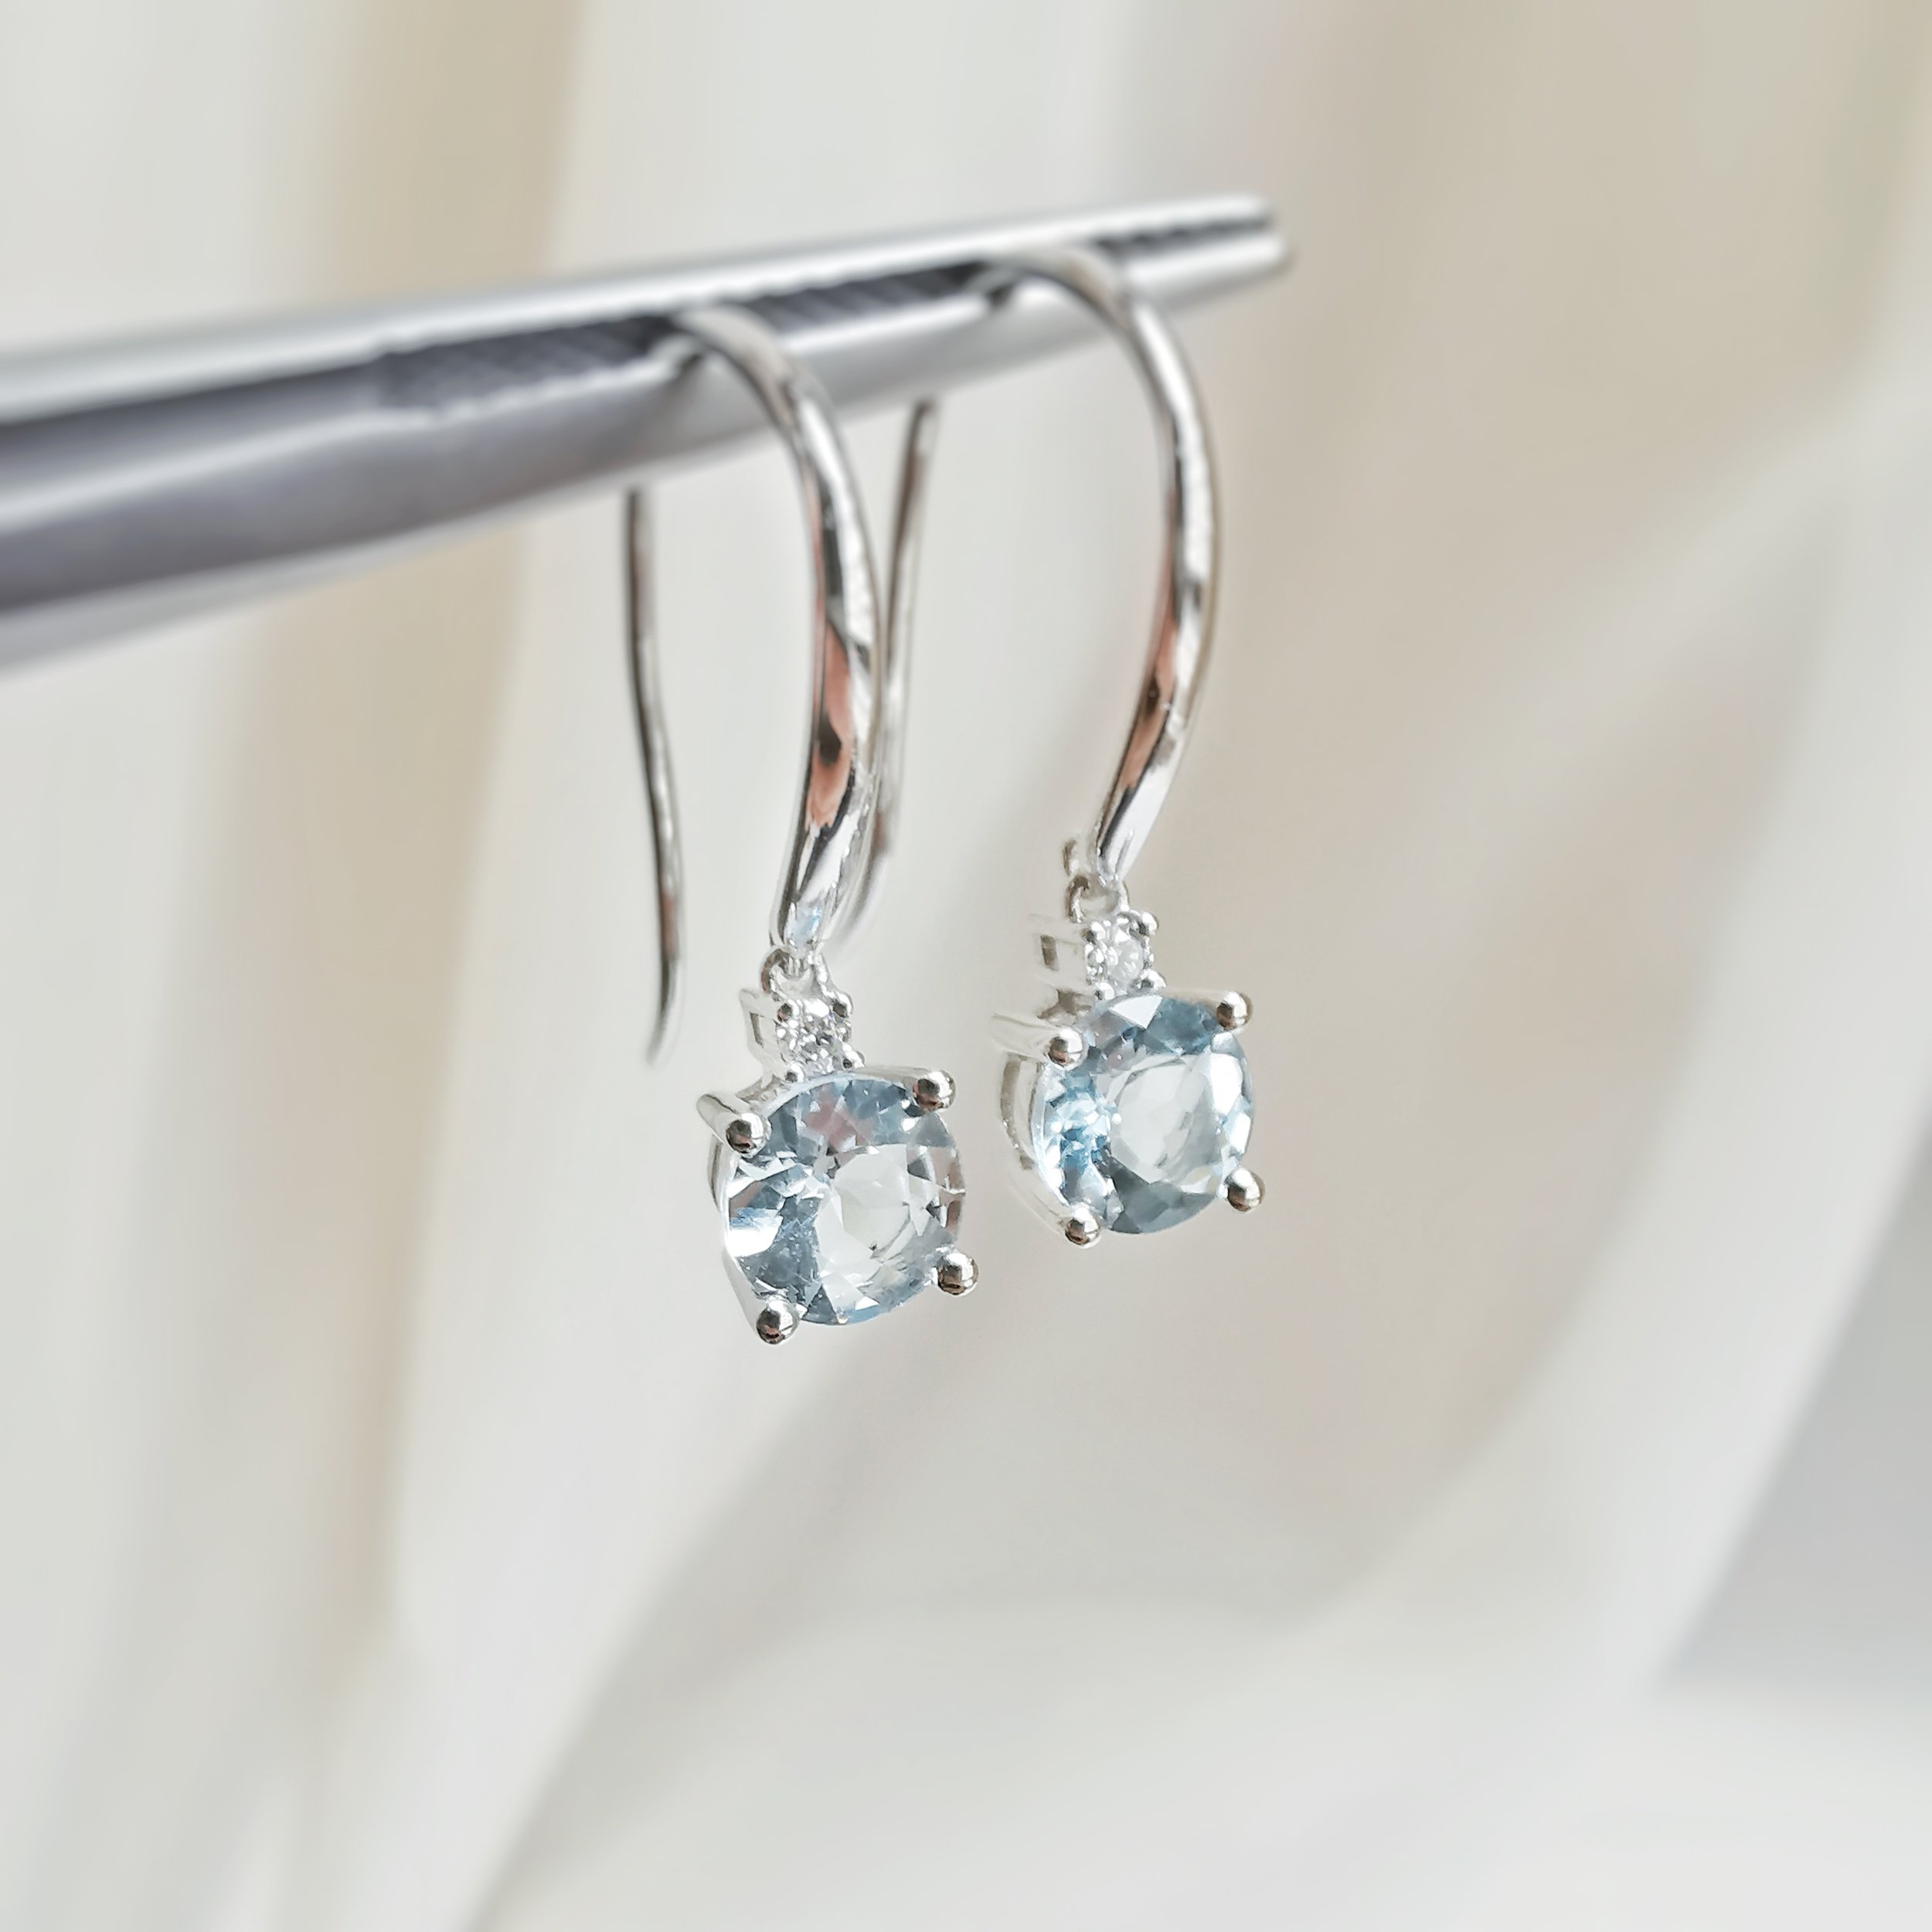 Aquamarine Earrings Dangle in Sterling Silver, March Birthstone Earrings, Aquamarine  Jewelry, 19th Anniversary Gifts for Her thuvien.quangtri.gov.vn